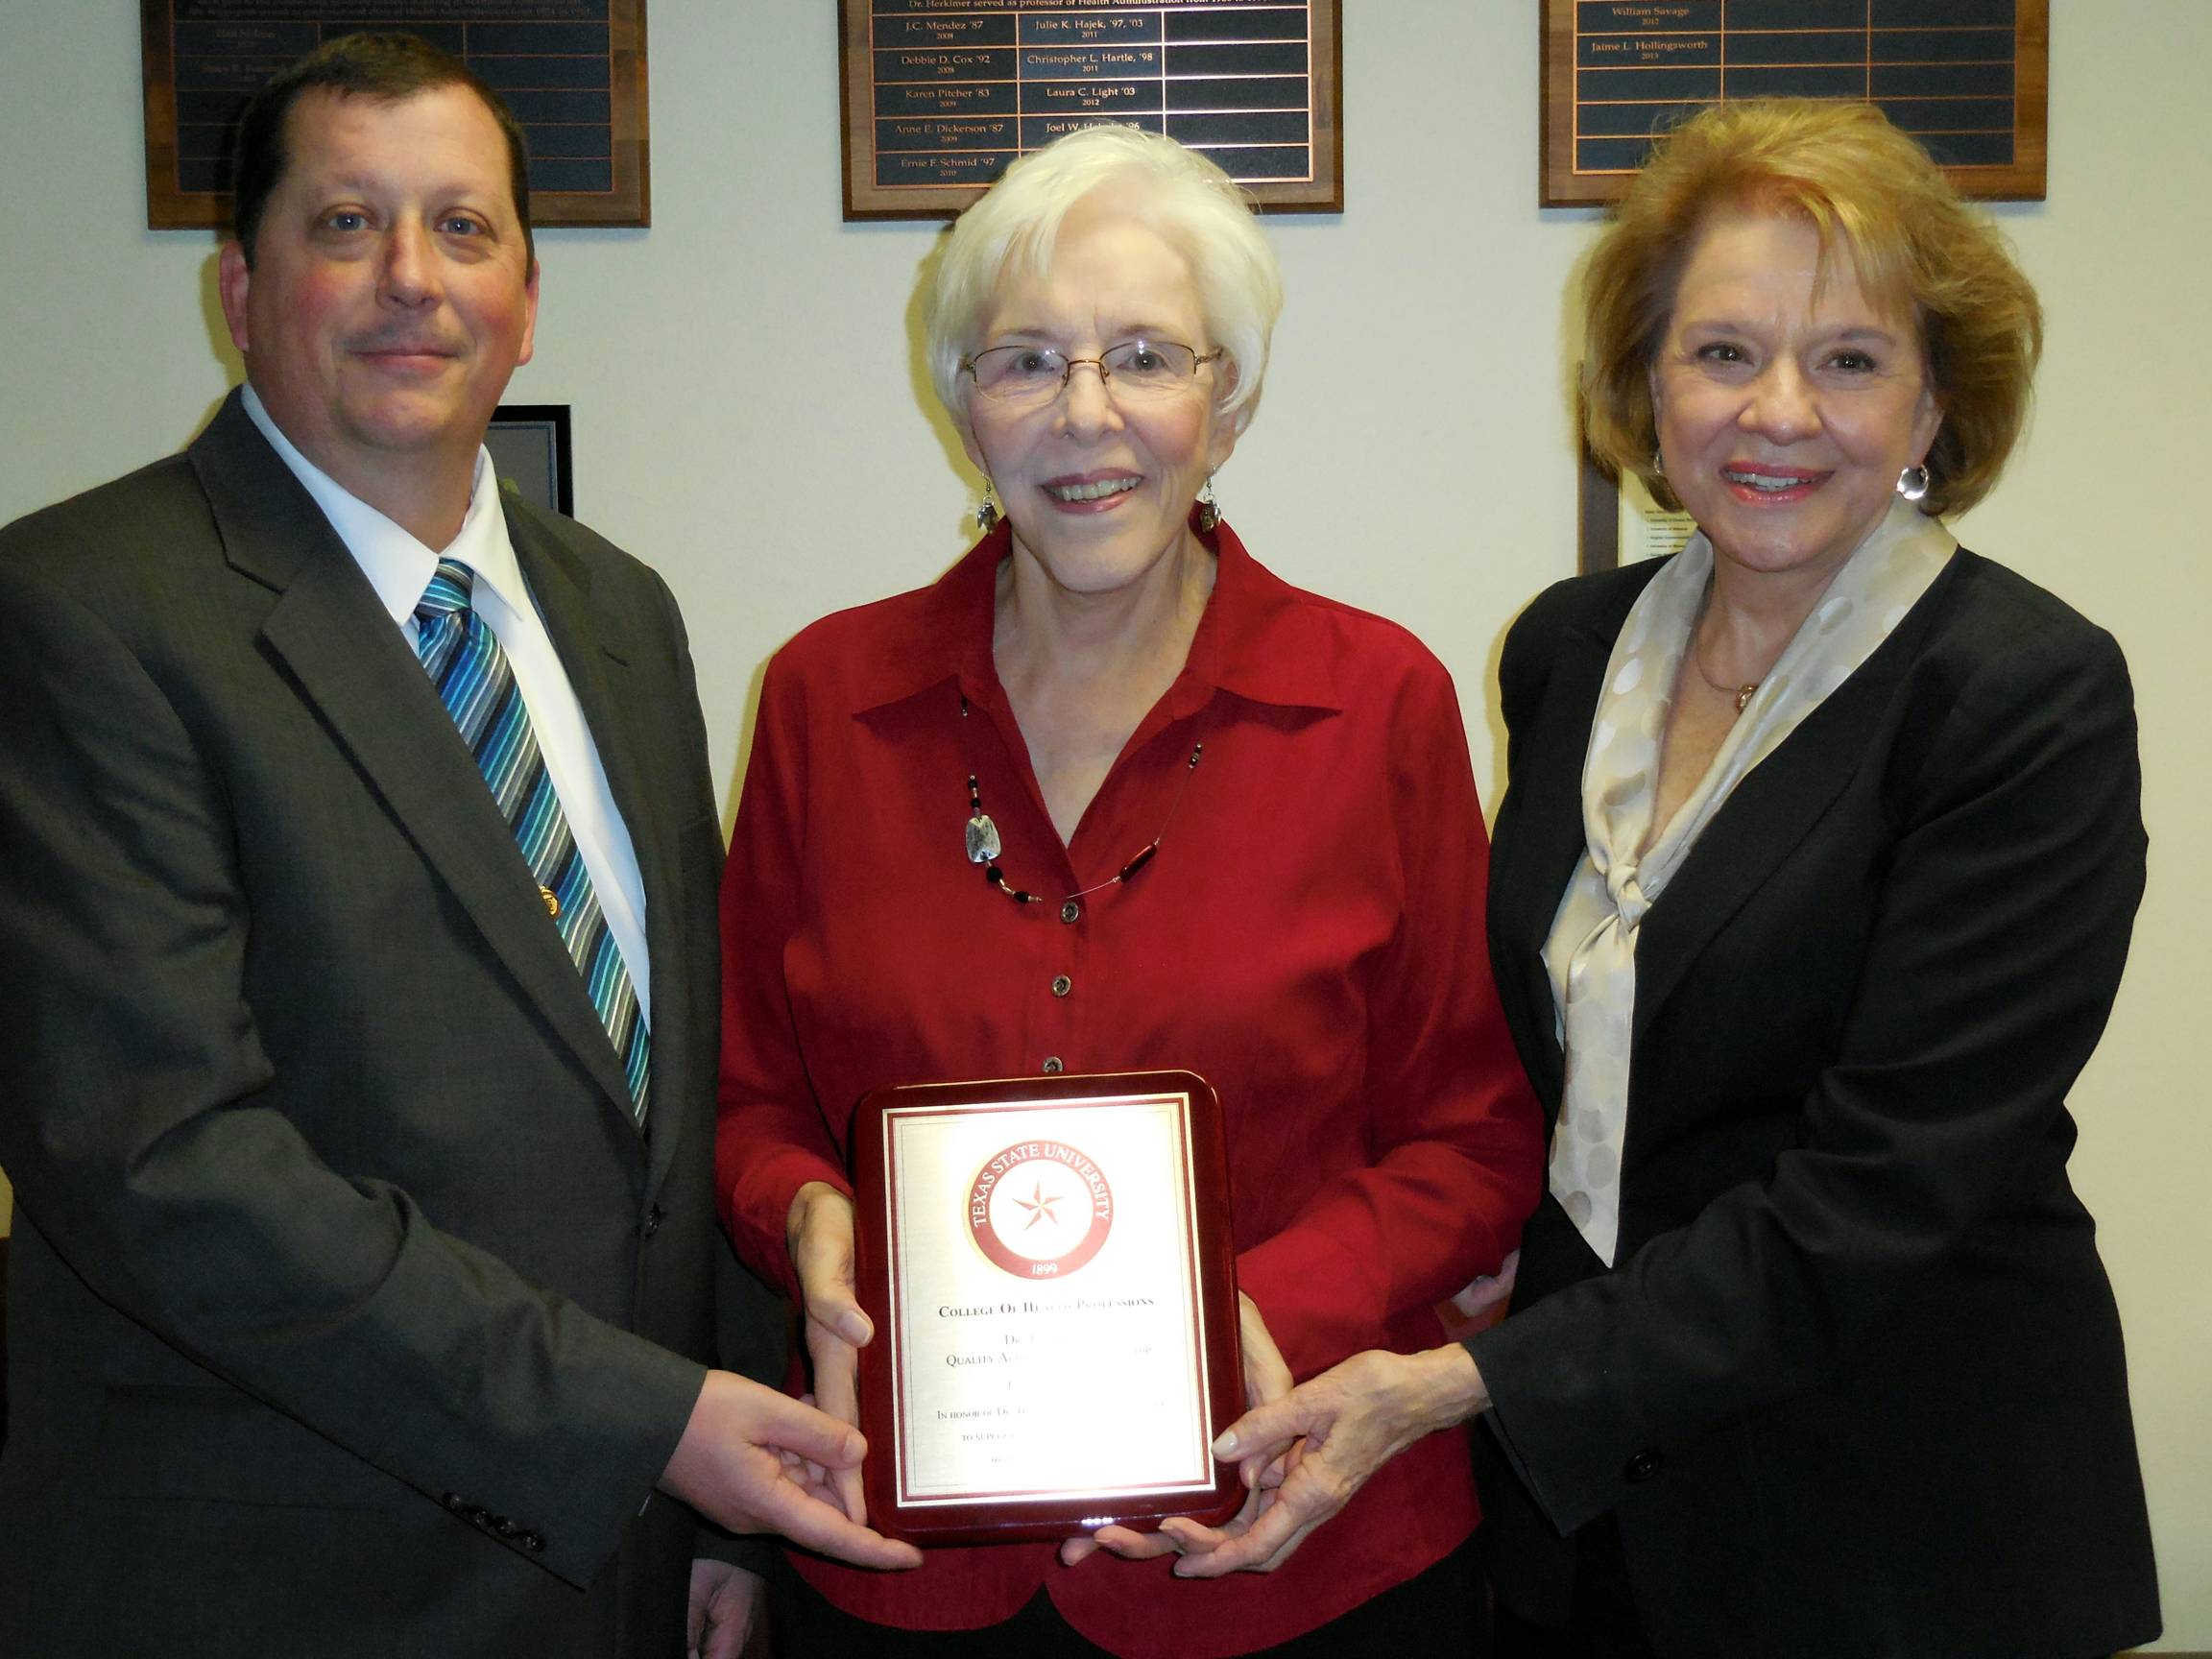 Dr. Boone receiving a plaque from Dean Ruth Welborn and Dr. Matthew Brooks